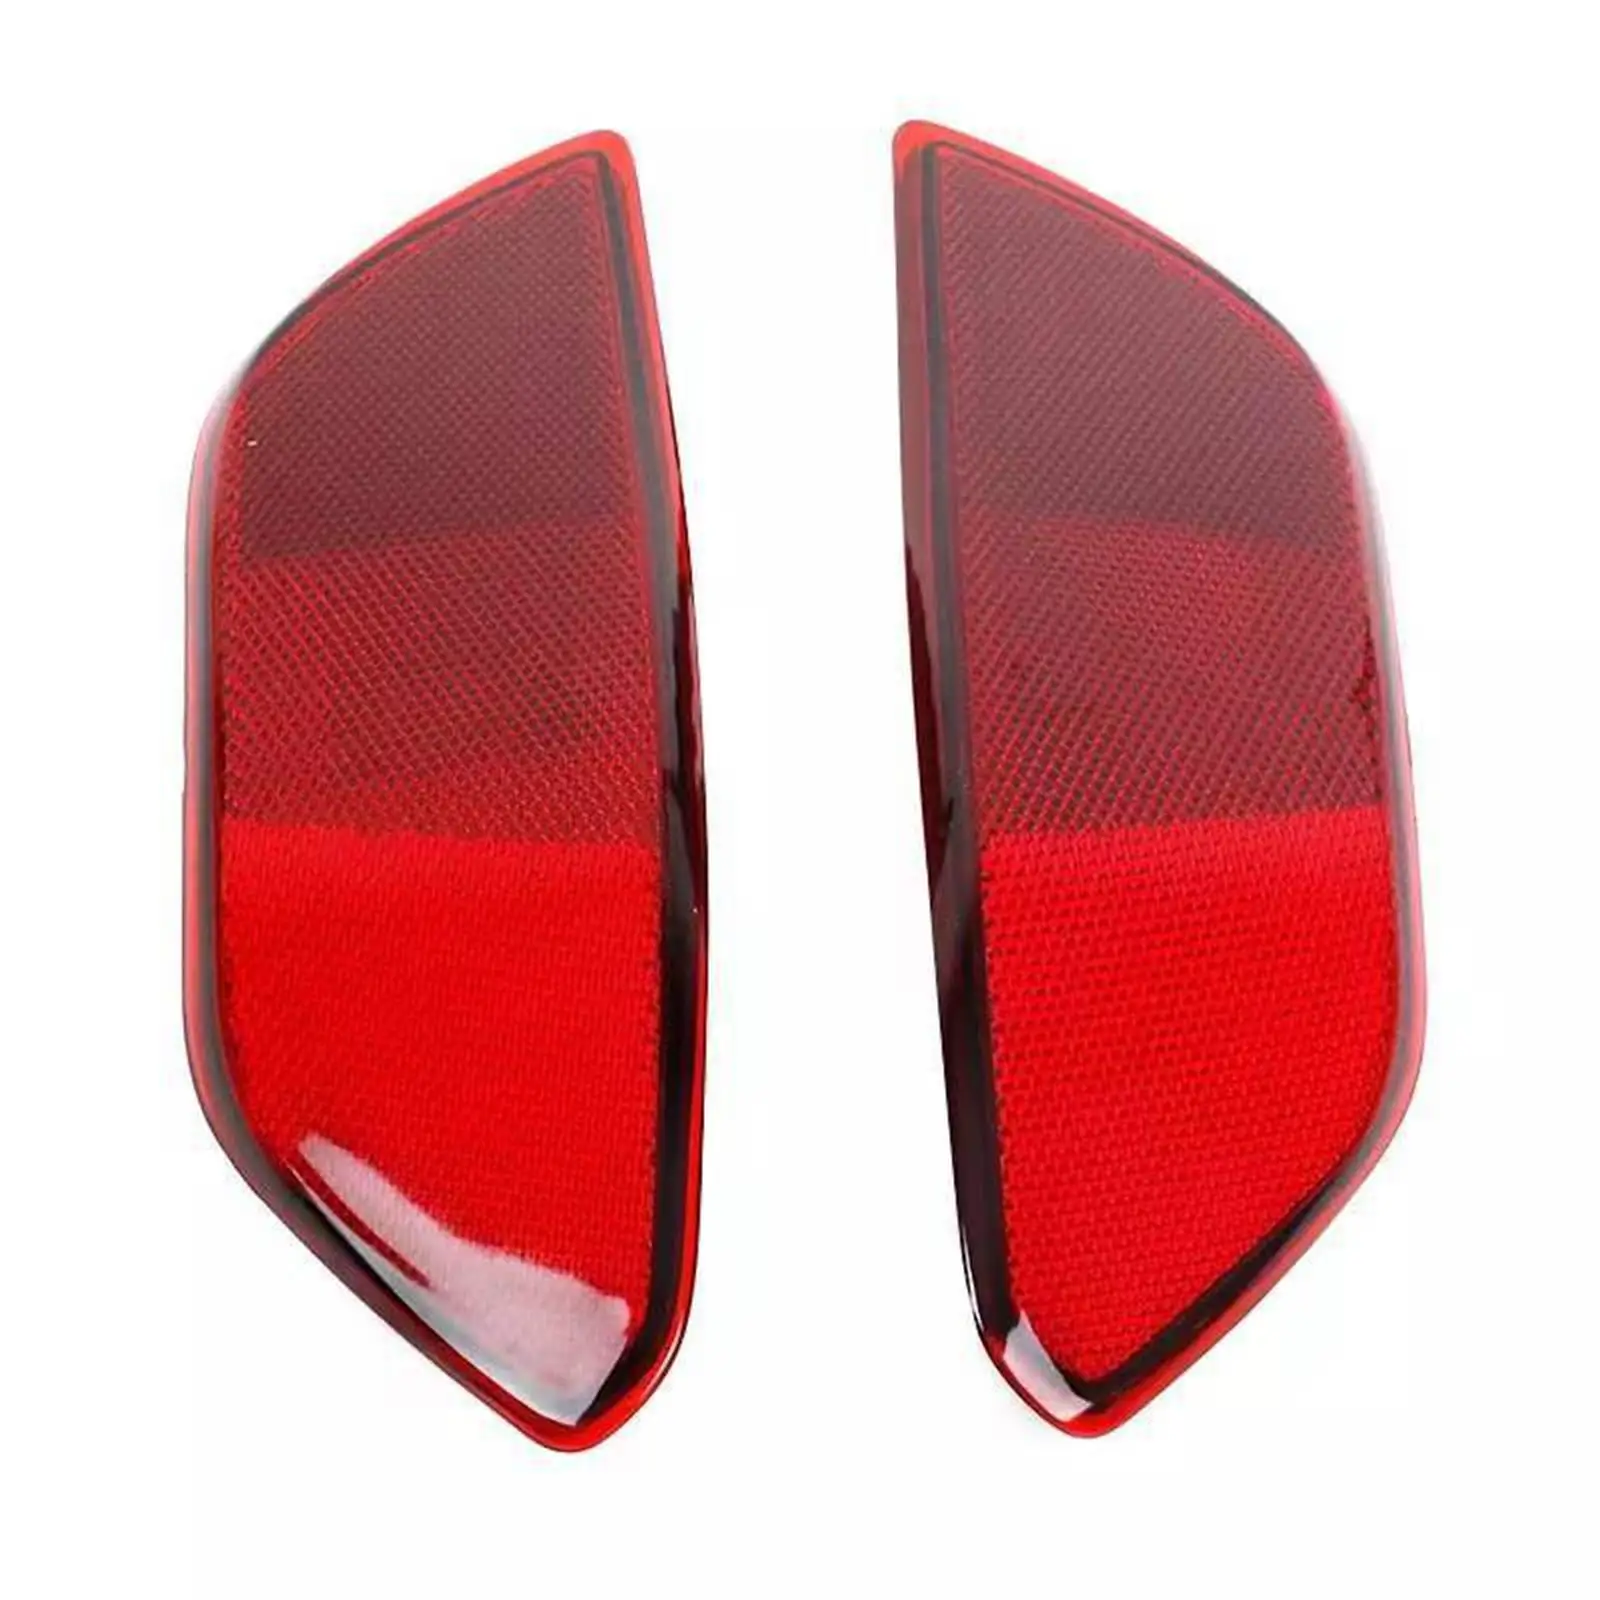 Reflector for Car Rear Replacement Drivers Rear Bumper Trim Reflector Marker for Porsche Cayenne Side Marker Light Assembly